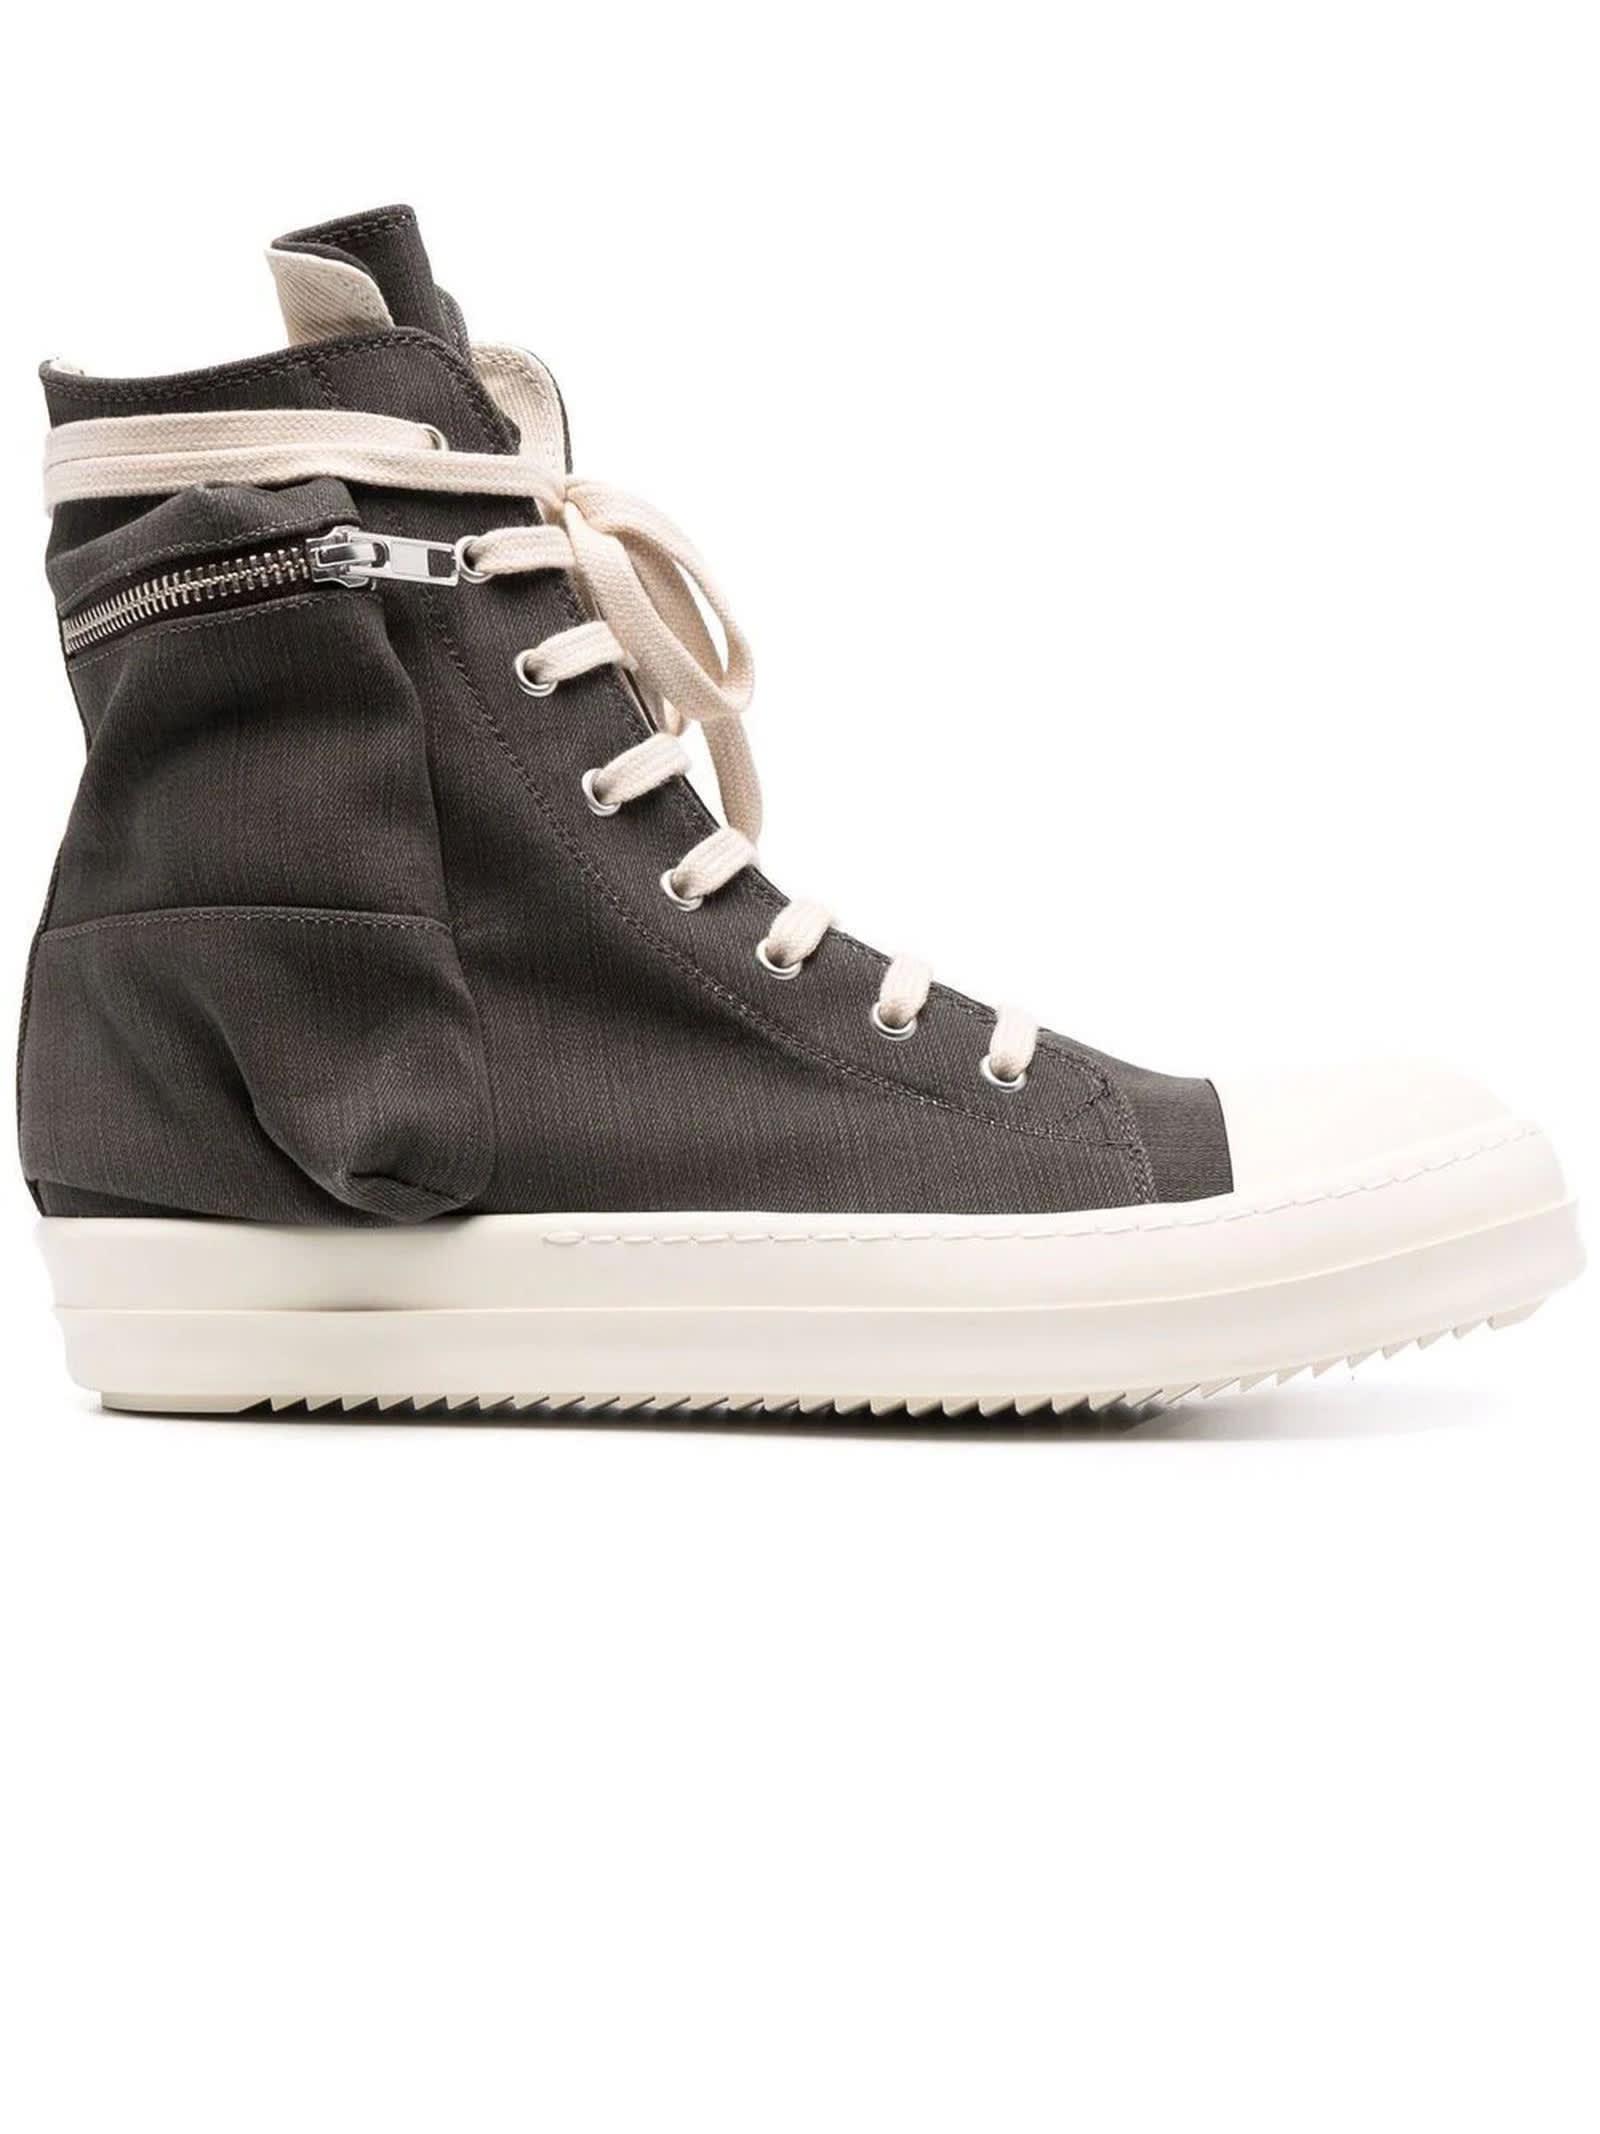 Rick Owens DRKSHDW Grey Canvas High-top Sneakers in Gray for Men | Lyst